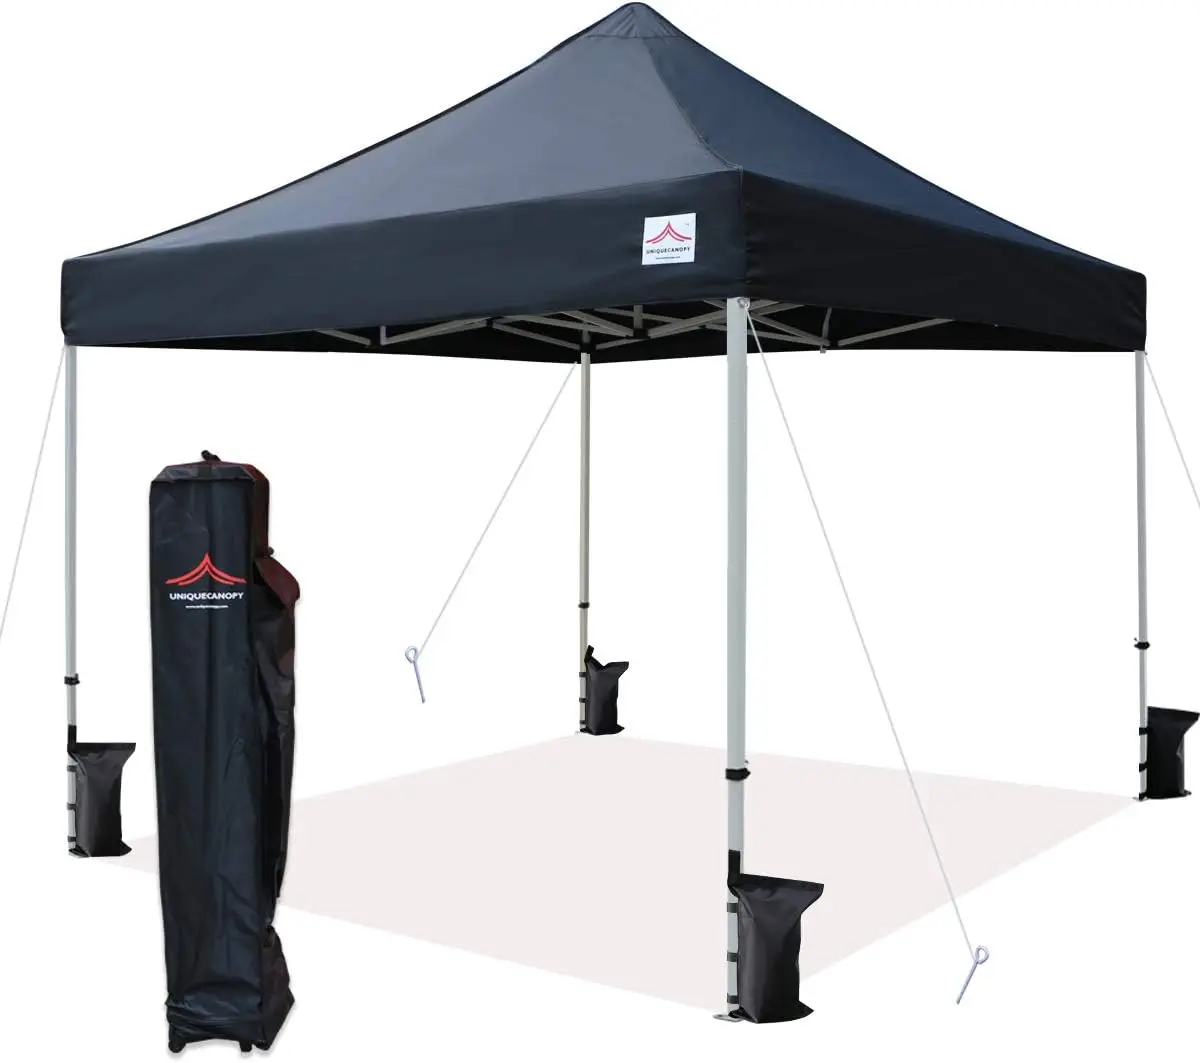 

10'x10' Ez Pop Up Canopy Tent Commercial Instant Shelter with Heavy Duty Roller Bag, 4 Canopy Sand Bags, 10x10 FT Black